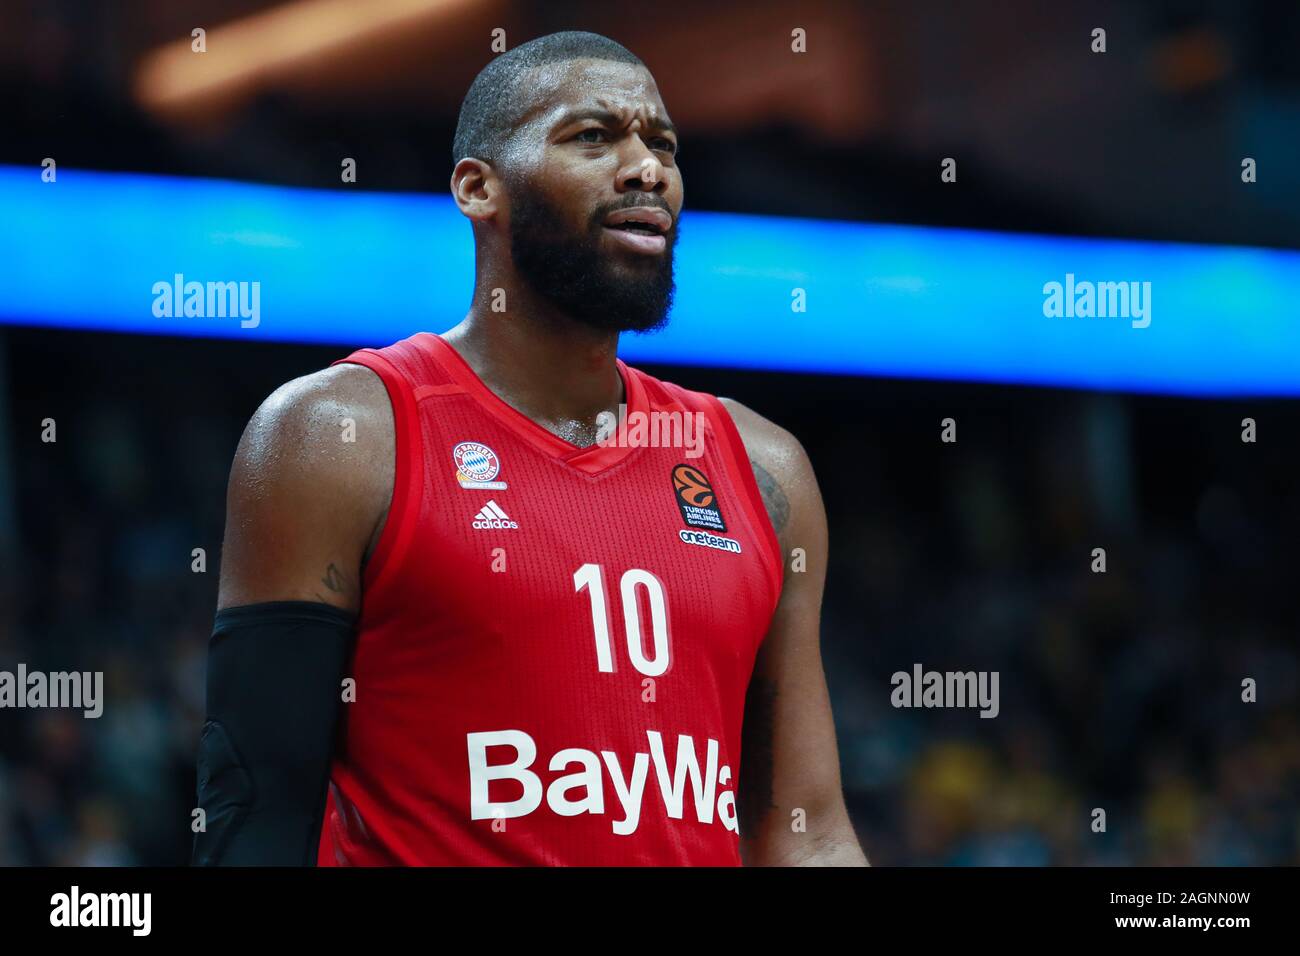 Berlin, Germany, December 18, 2019:Portrait of Greg Monroe of FC Bayern Munich Basketball in action during a basketball match Stock Photo